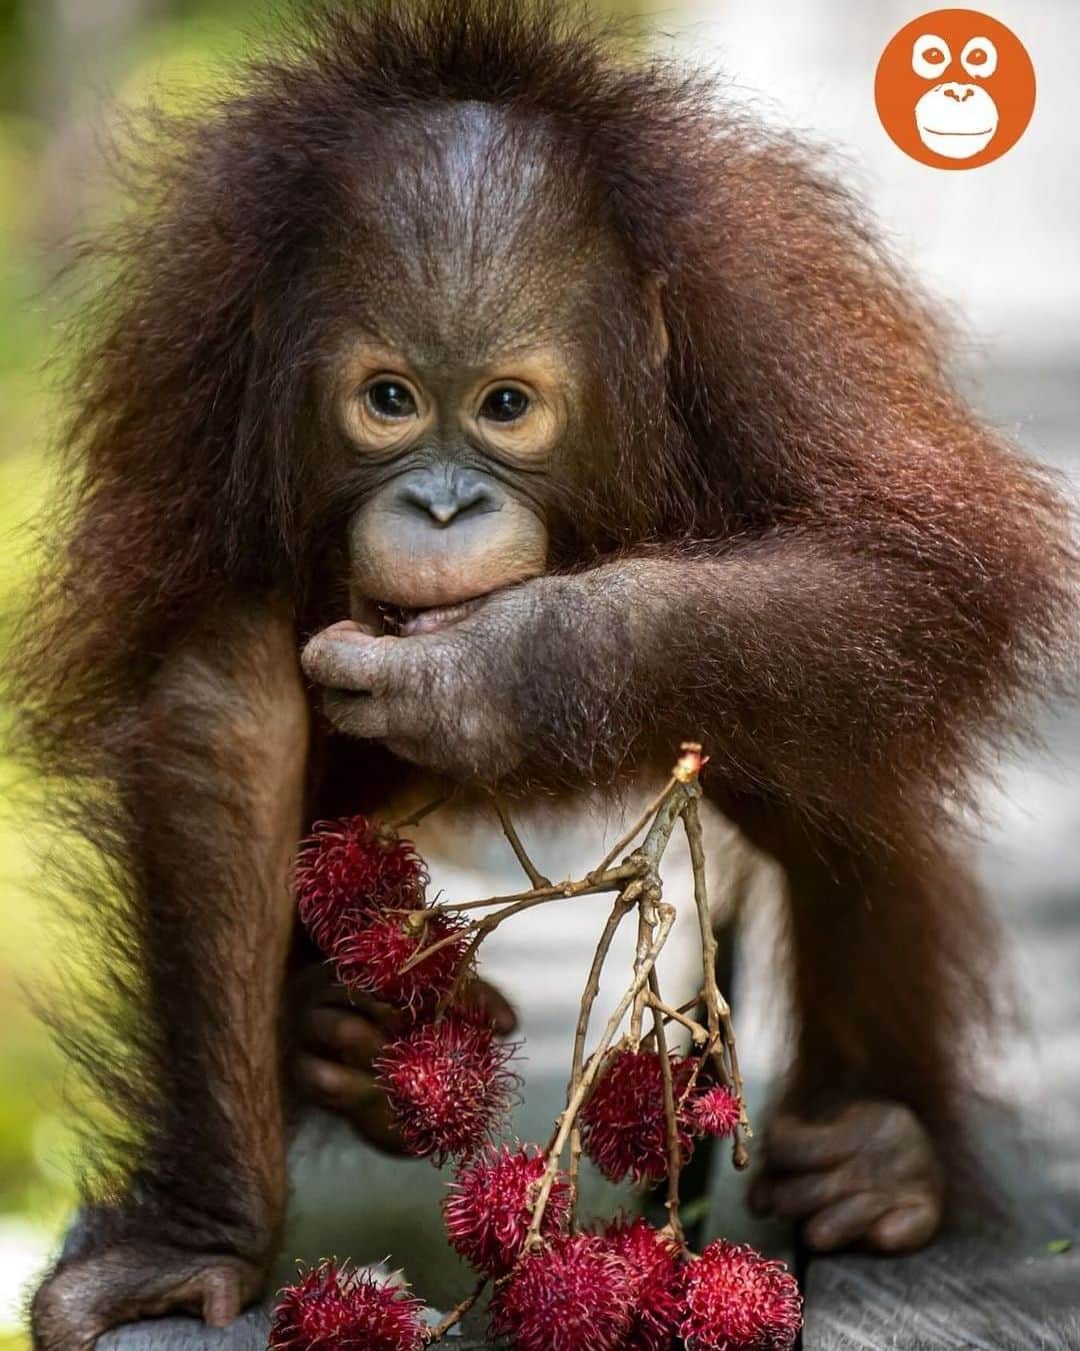 OFI Australiaのインスタグラム：「Did you know ...  About 60% of the orangutan's diet includes fruit, such as durians, jackfruit, lychees, mangosteens, mangoes, rambutans and figs. Orangutans are known as the “gardeners” of the forest, playing a vital role in seed dispersion and germination, and maintaining the health of the forest ecosystem.  #OrangutanAwarenessWeek #oaw2023 #OAW #orangutanfacts #saveorangutans #saynotopalmoil #orangutanbaby #fosteranorangutan #OrangutanRehabilitation #orangutanorphan」